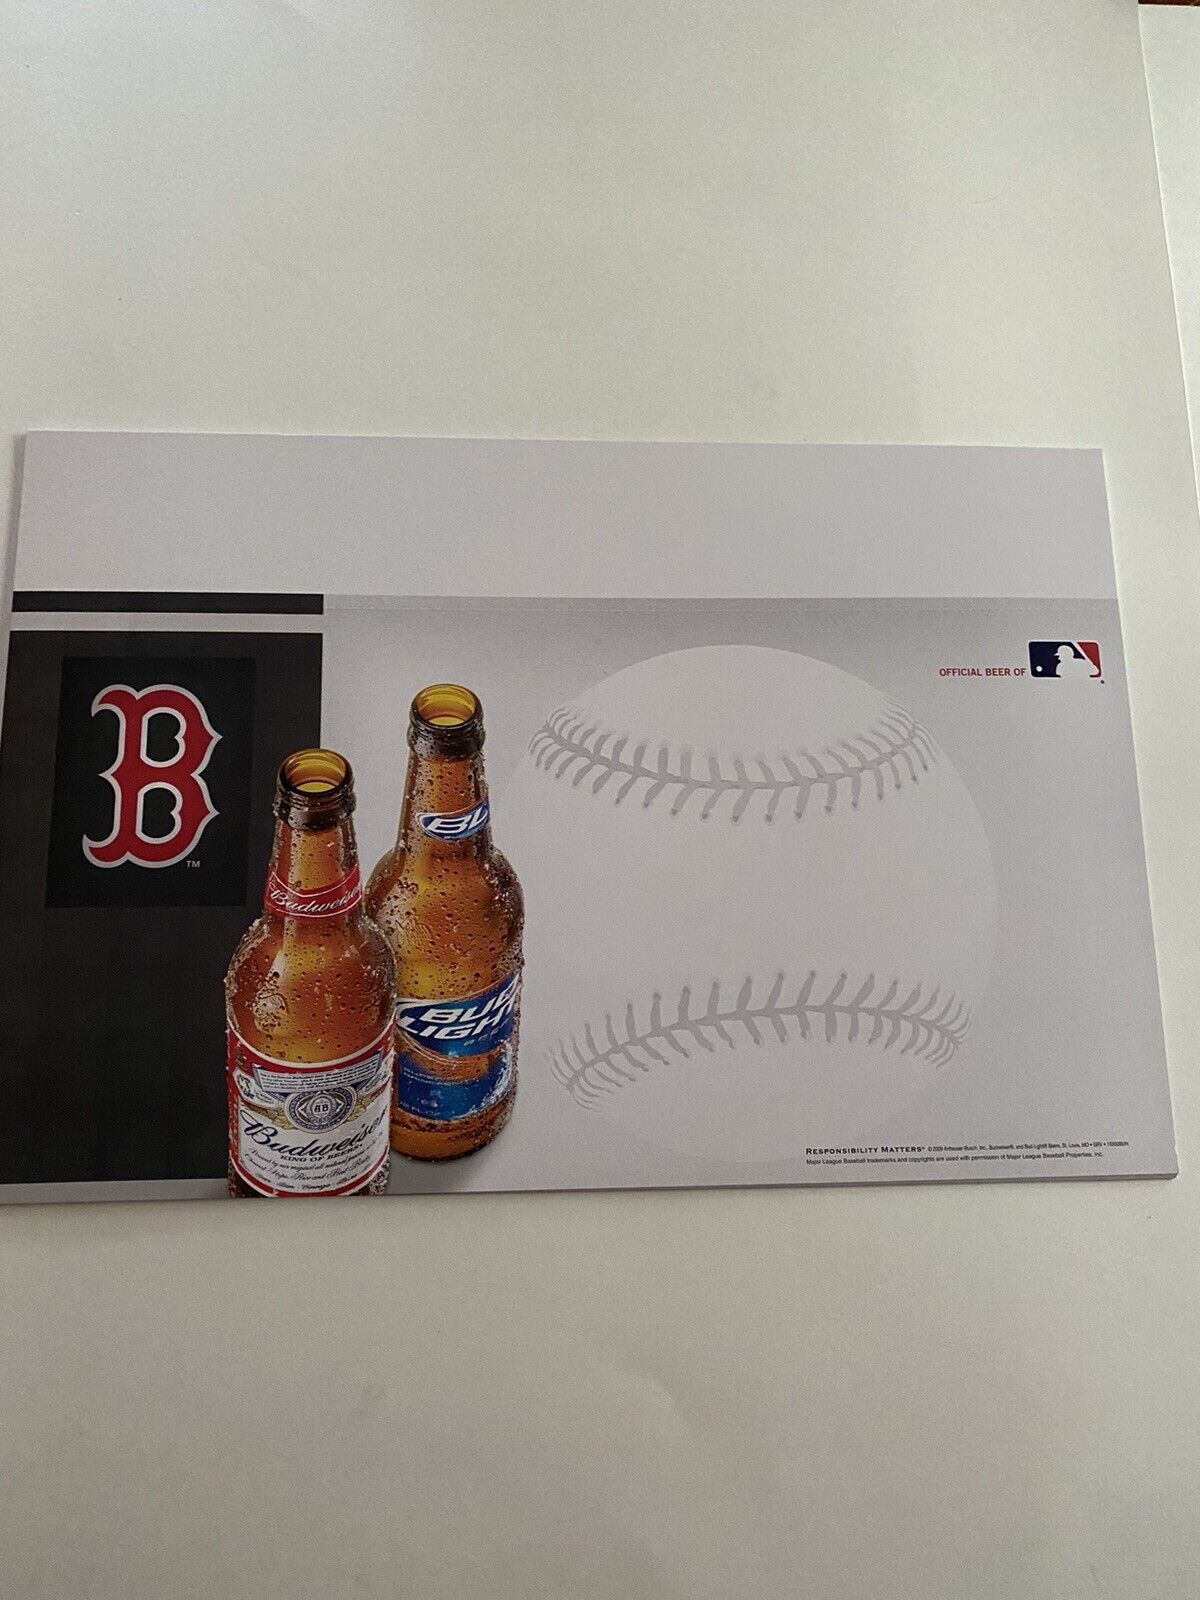 2008 Budweiser Boston Red Sox Store Advertising Poster Man Cave Bar 12x18